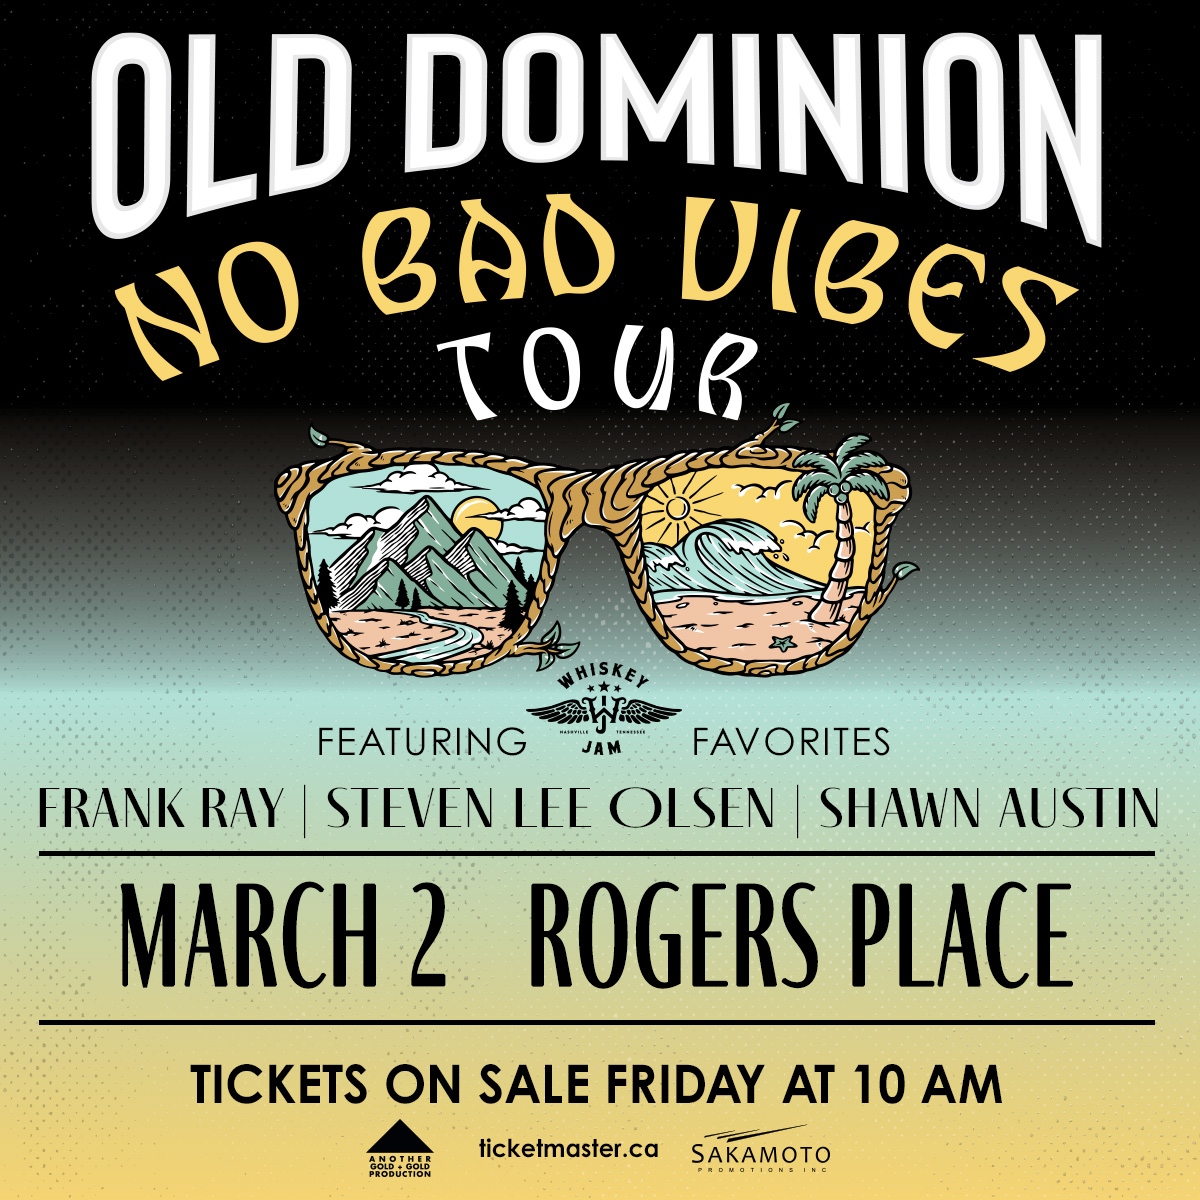 🎫📅 Set yourself a reminder, tickets for the @OldDominion show at #RogersPlace are on sale this Friday!! More info: RogersPlace.com/OldDominion